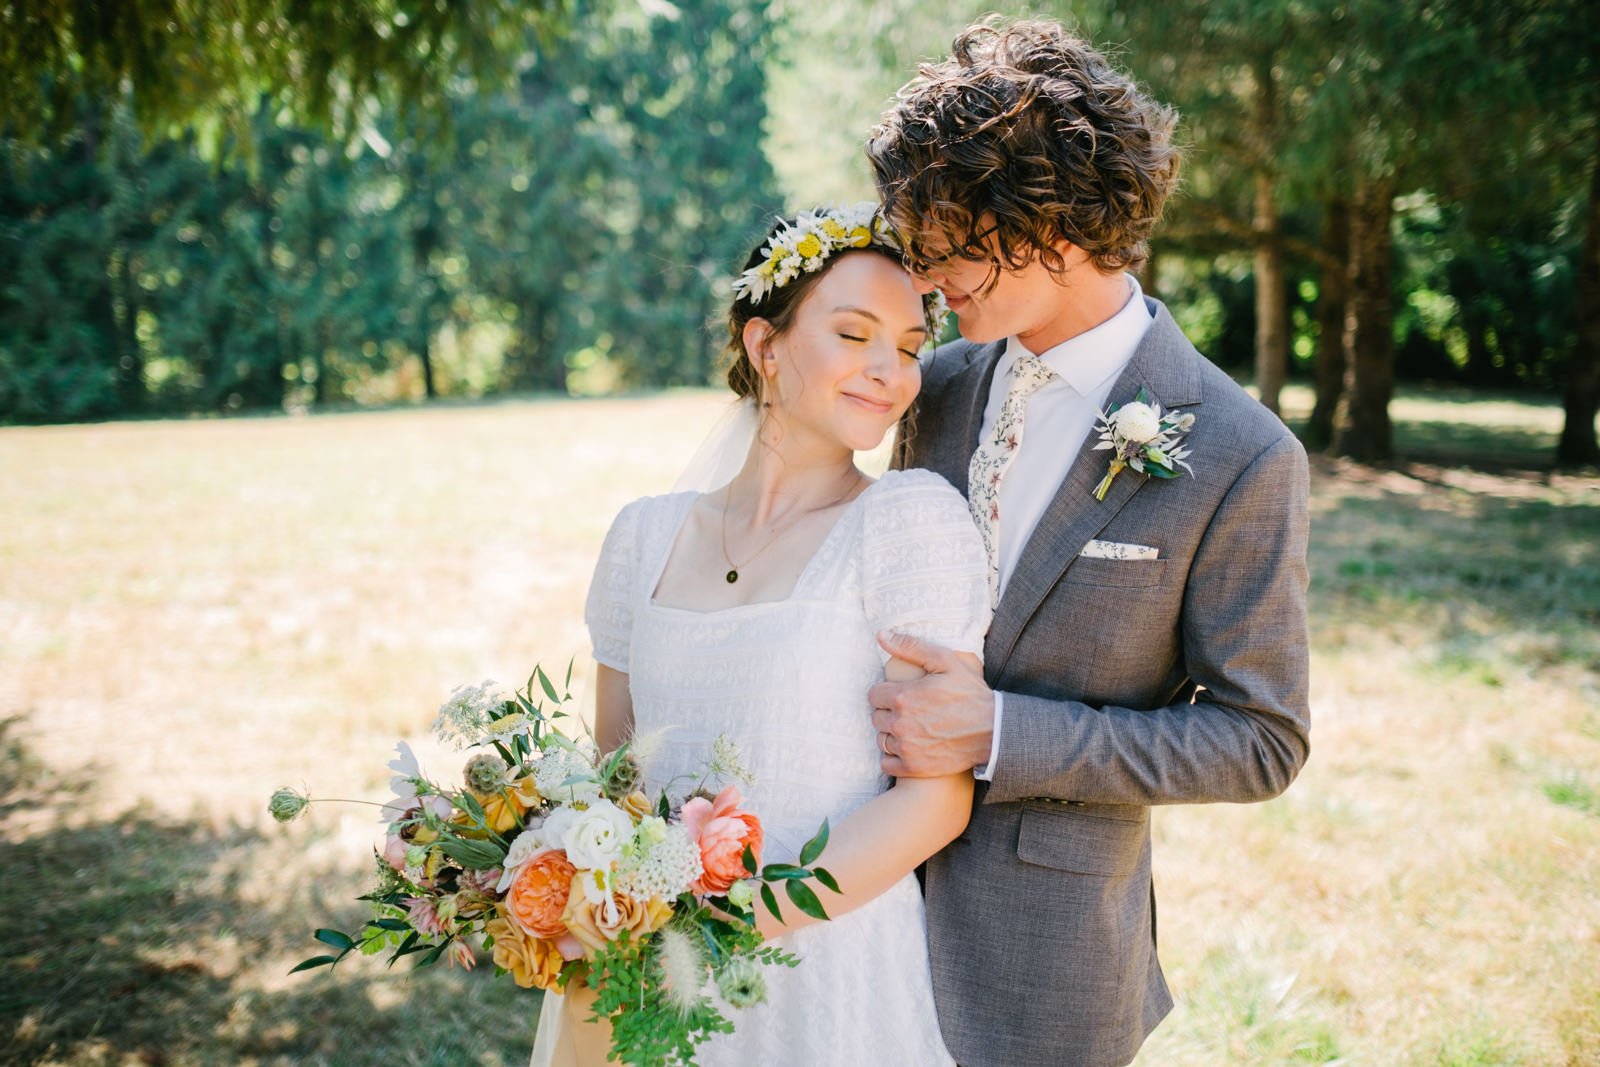  Bride with yellow daisy flower crown smiles while being embraced by groom in floral tie and grey suit in front of farm field 